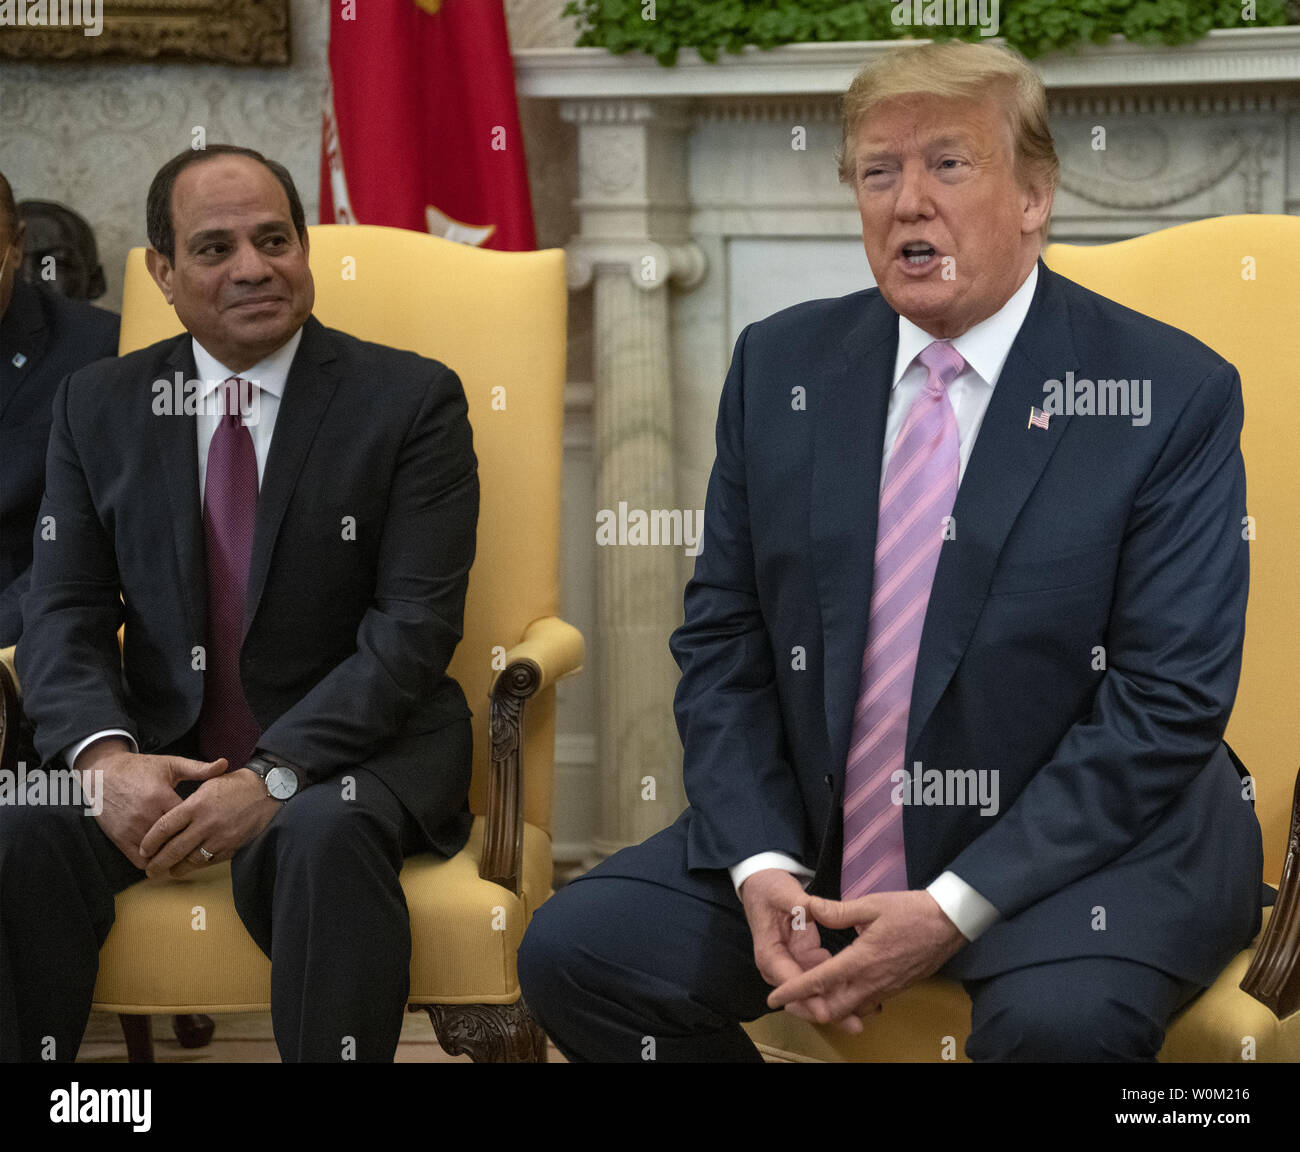 President Donald Trump (L) meets with Egyptian President Abdel Fattah el-Sisi in the Oval Office of the White House in Washington, DC on April 9, 2019.  El-Sisi is visiting the White House for talks.     Photo by Ron Sachs/UPI Stock Photo